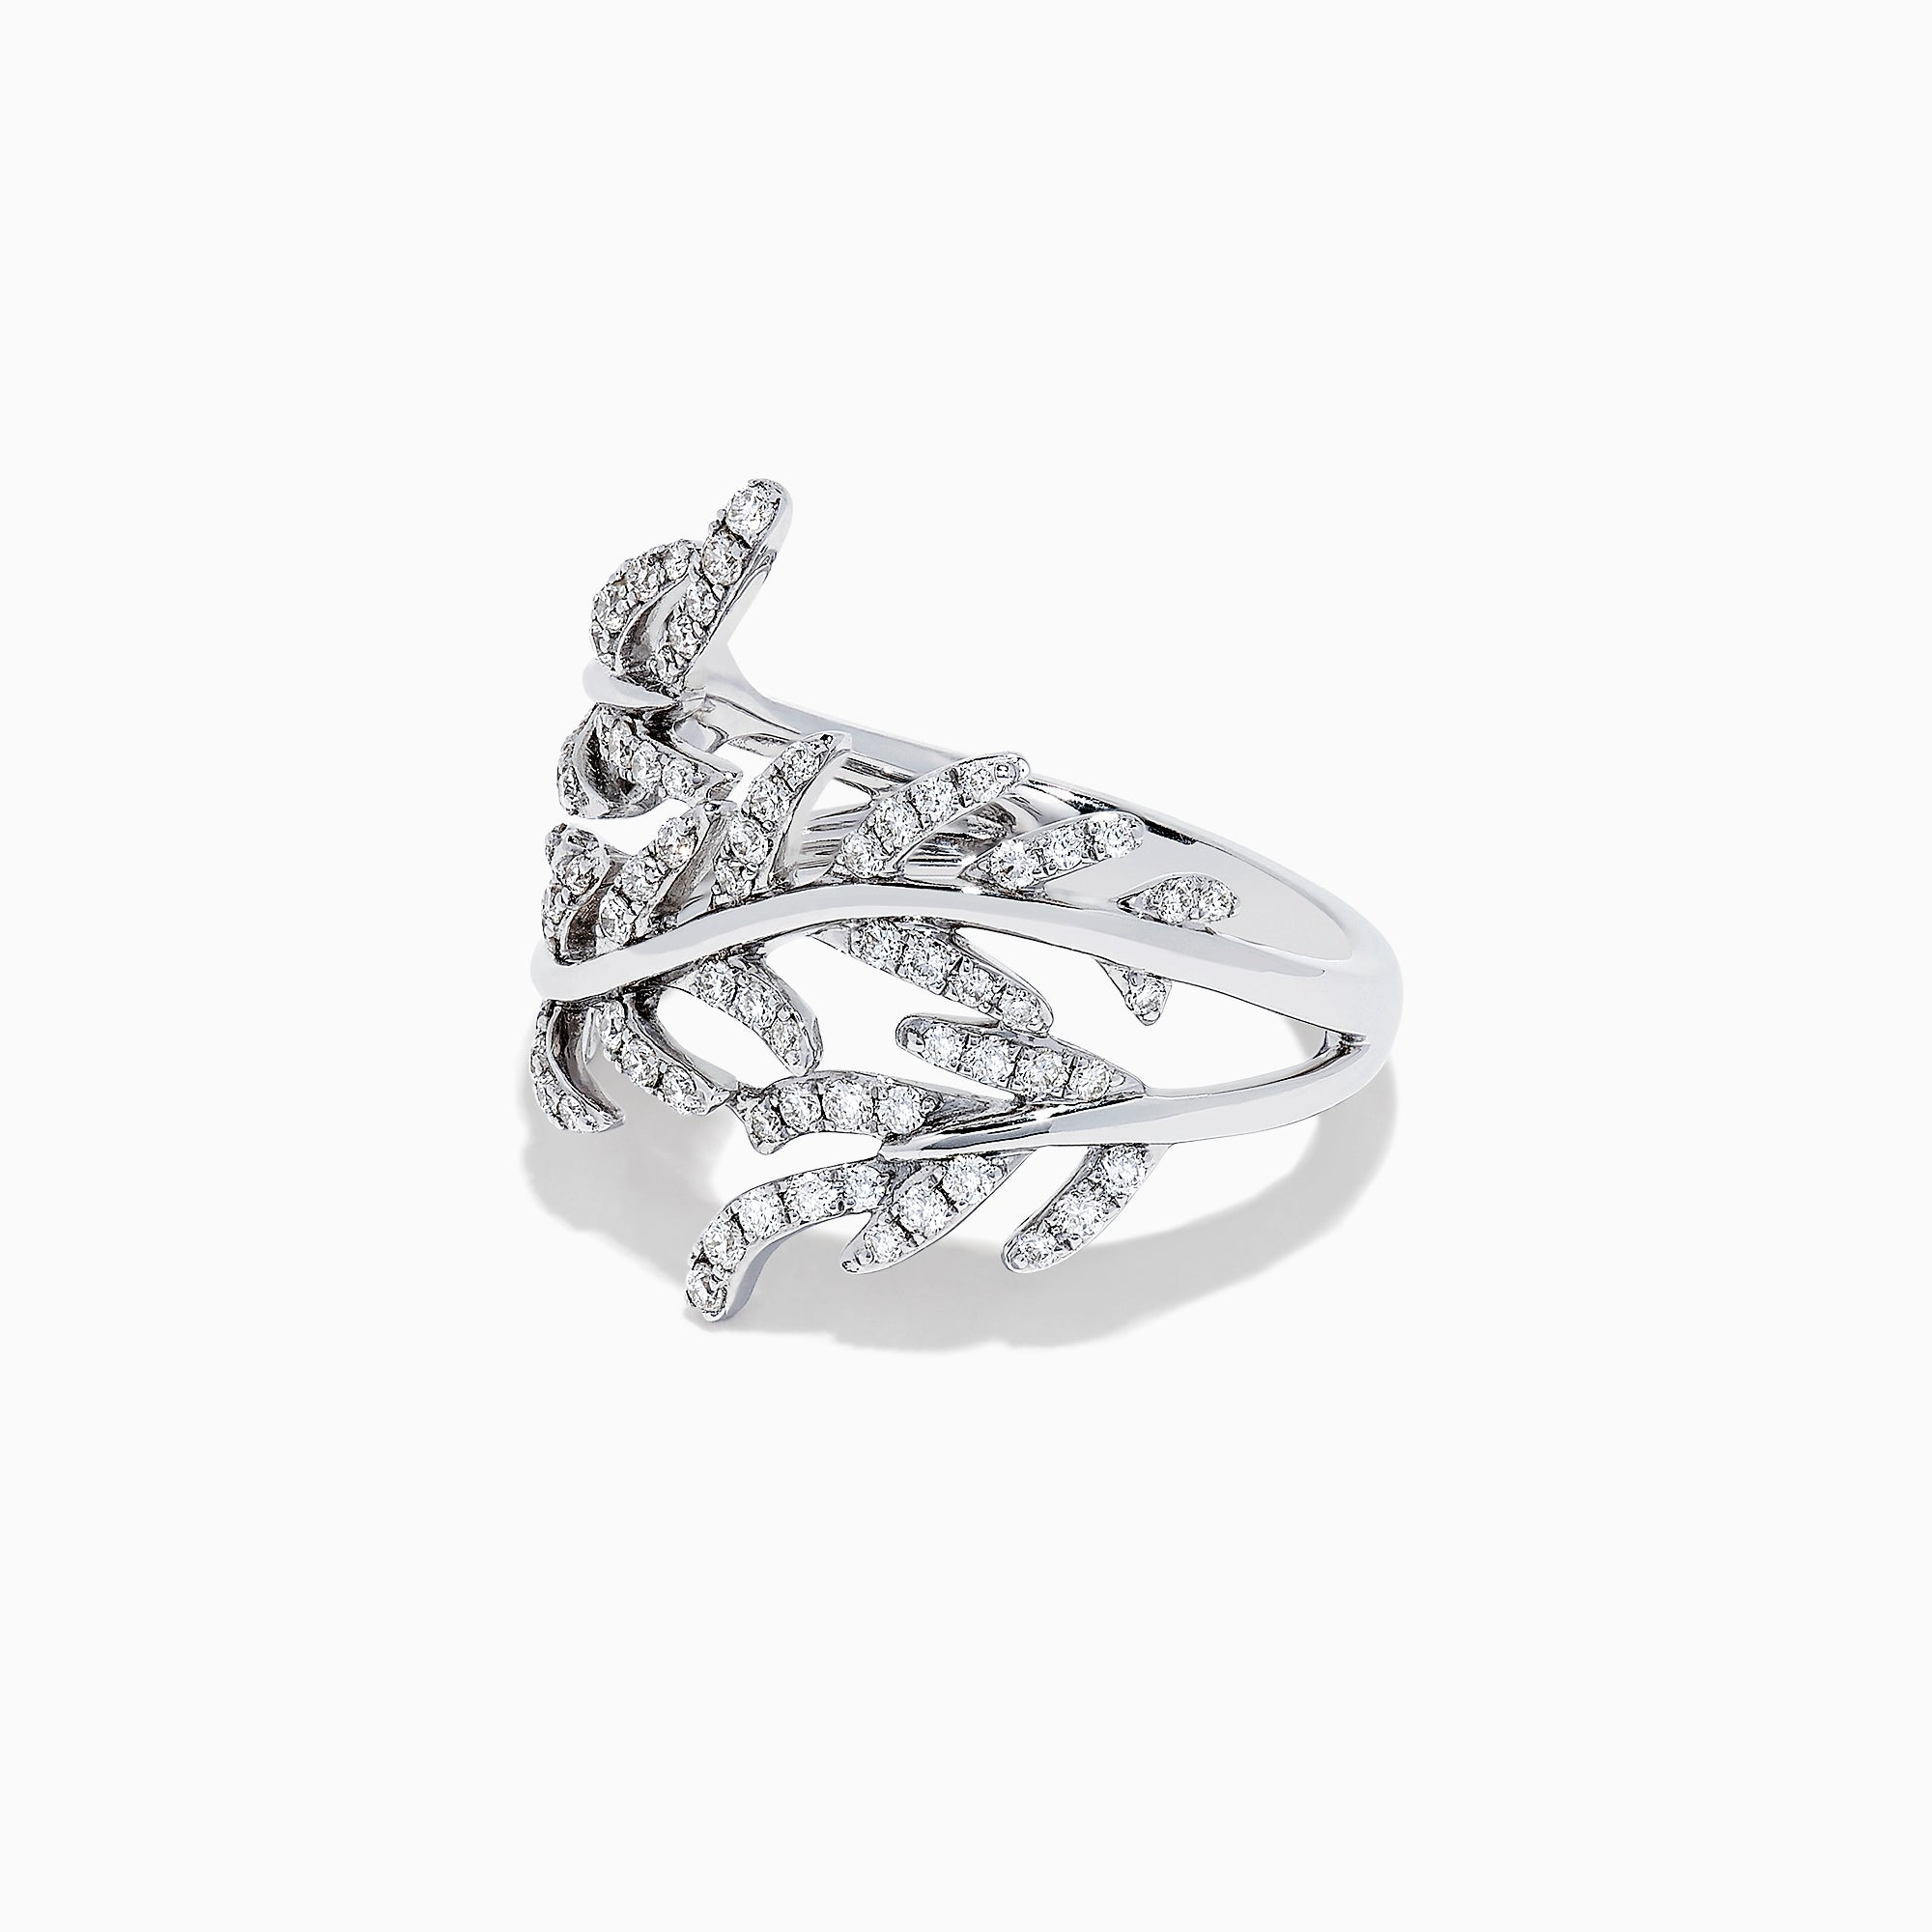 Effy Pave Classica 14K White Gold Diamond Wrapped Leaf Ring, 0.62 TCW